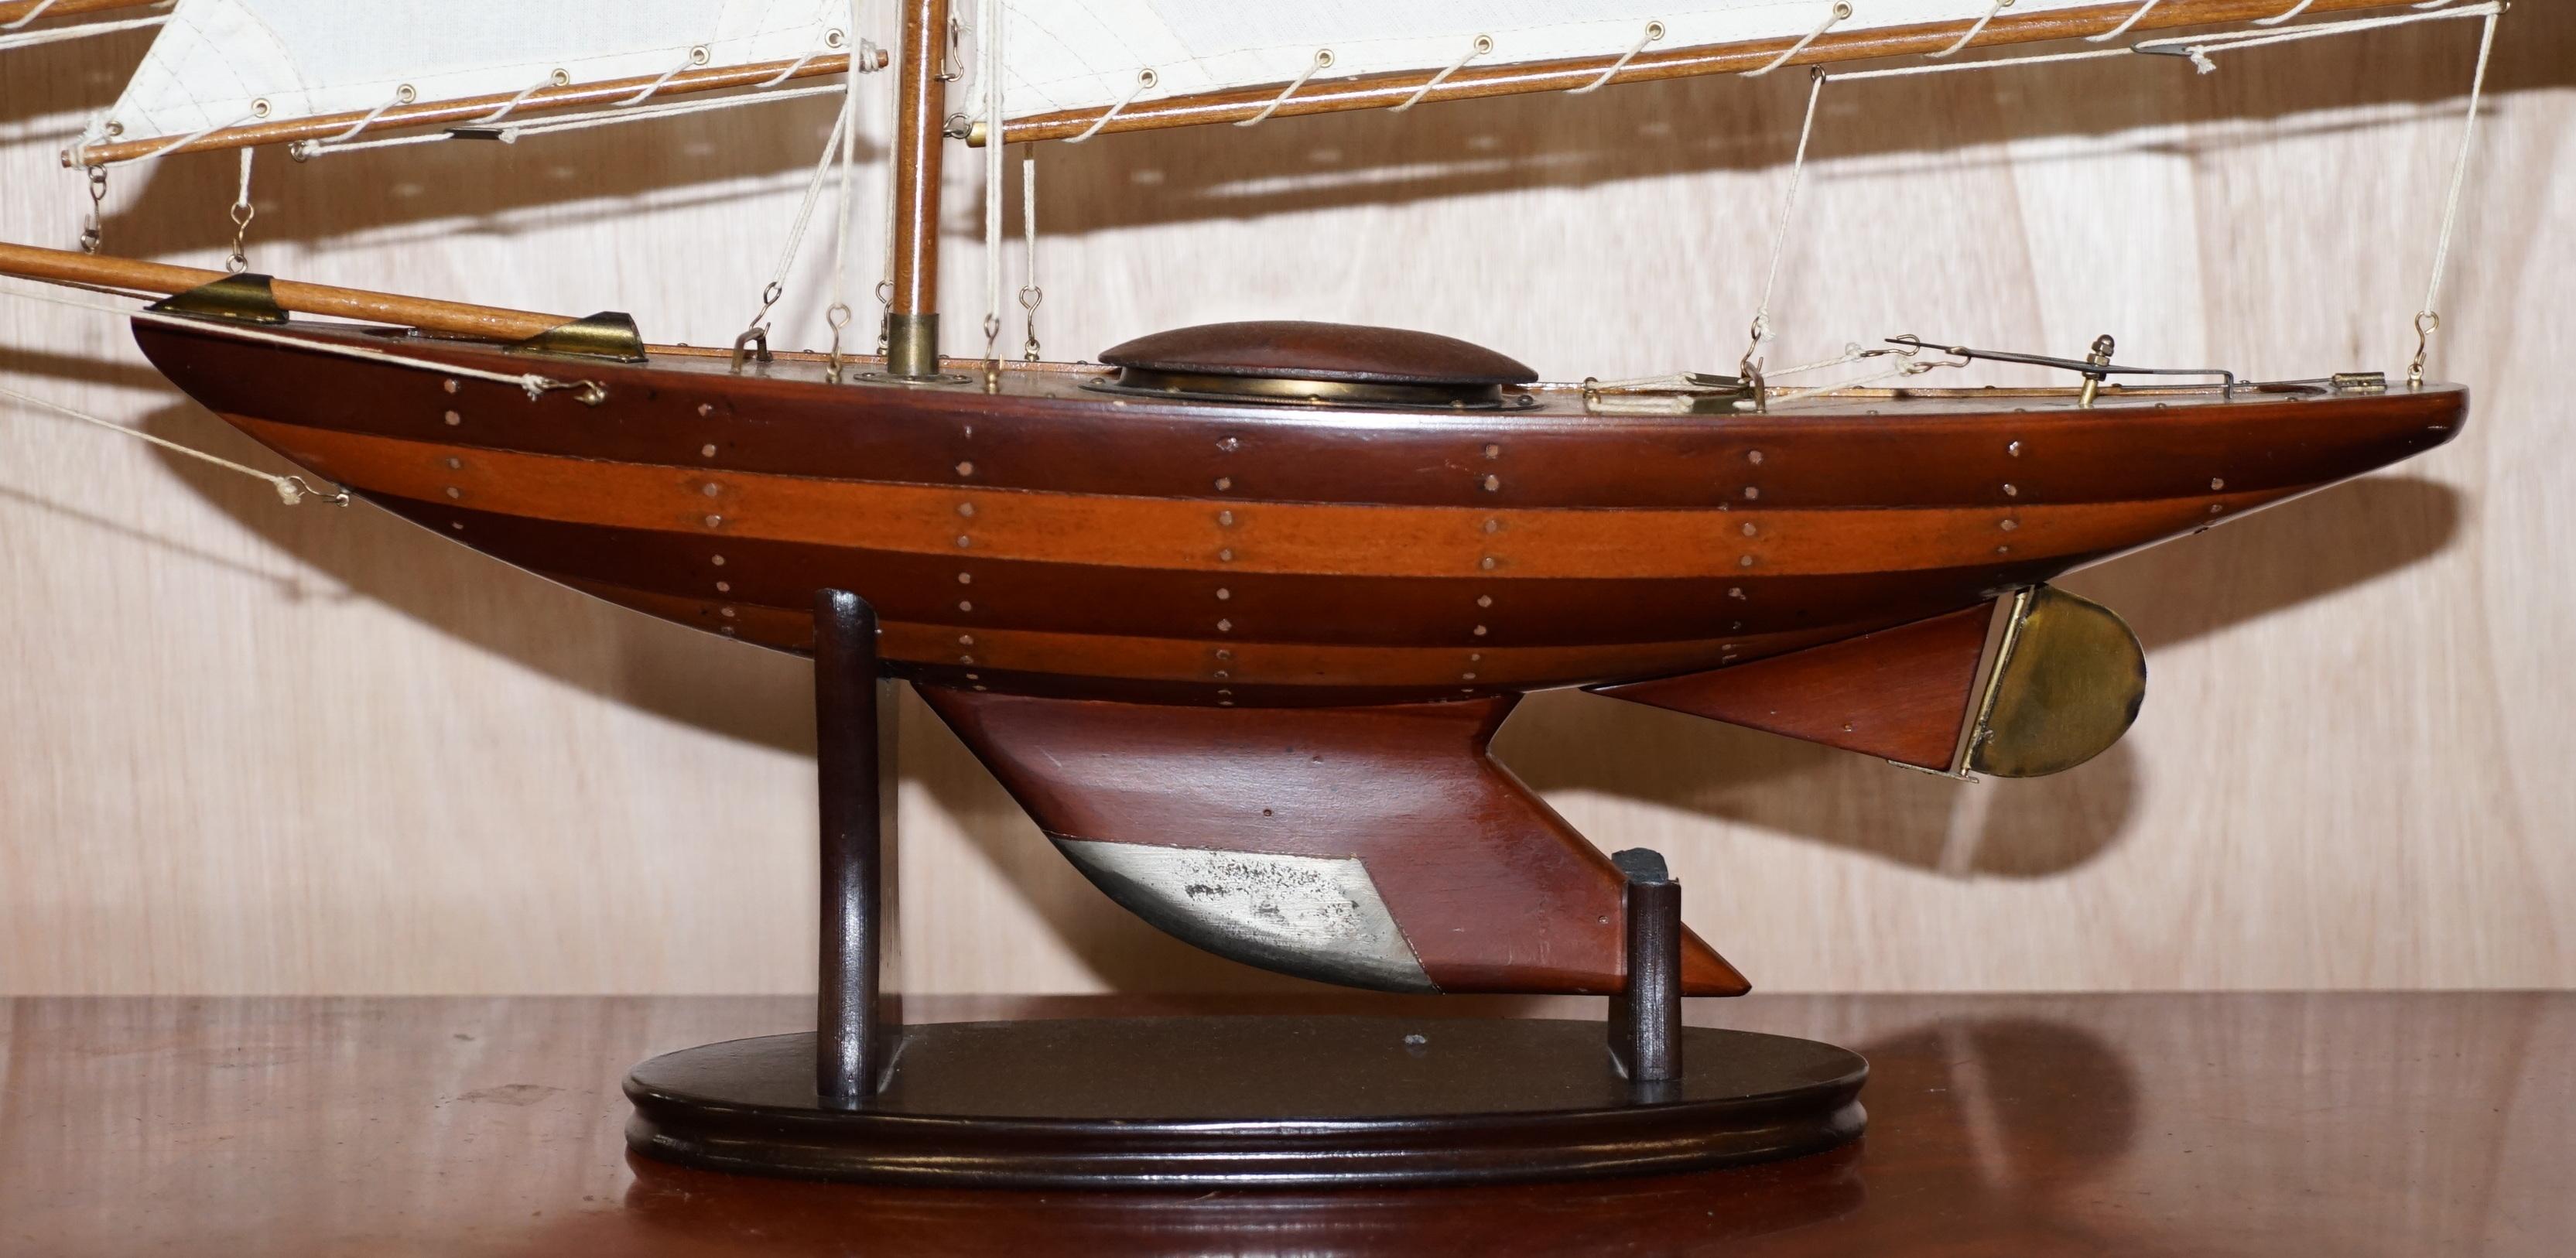 We are delighted to offer for sale this stunning vintage model sailboat

A very decorative piece, I have two of these, the other is smaller and listed under my other items

This one is large and in charge, it looks great from all angles, the